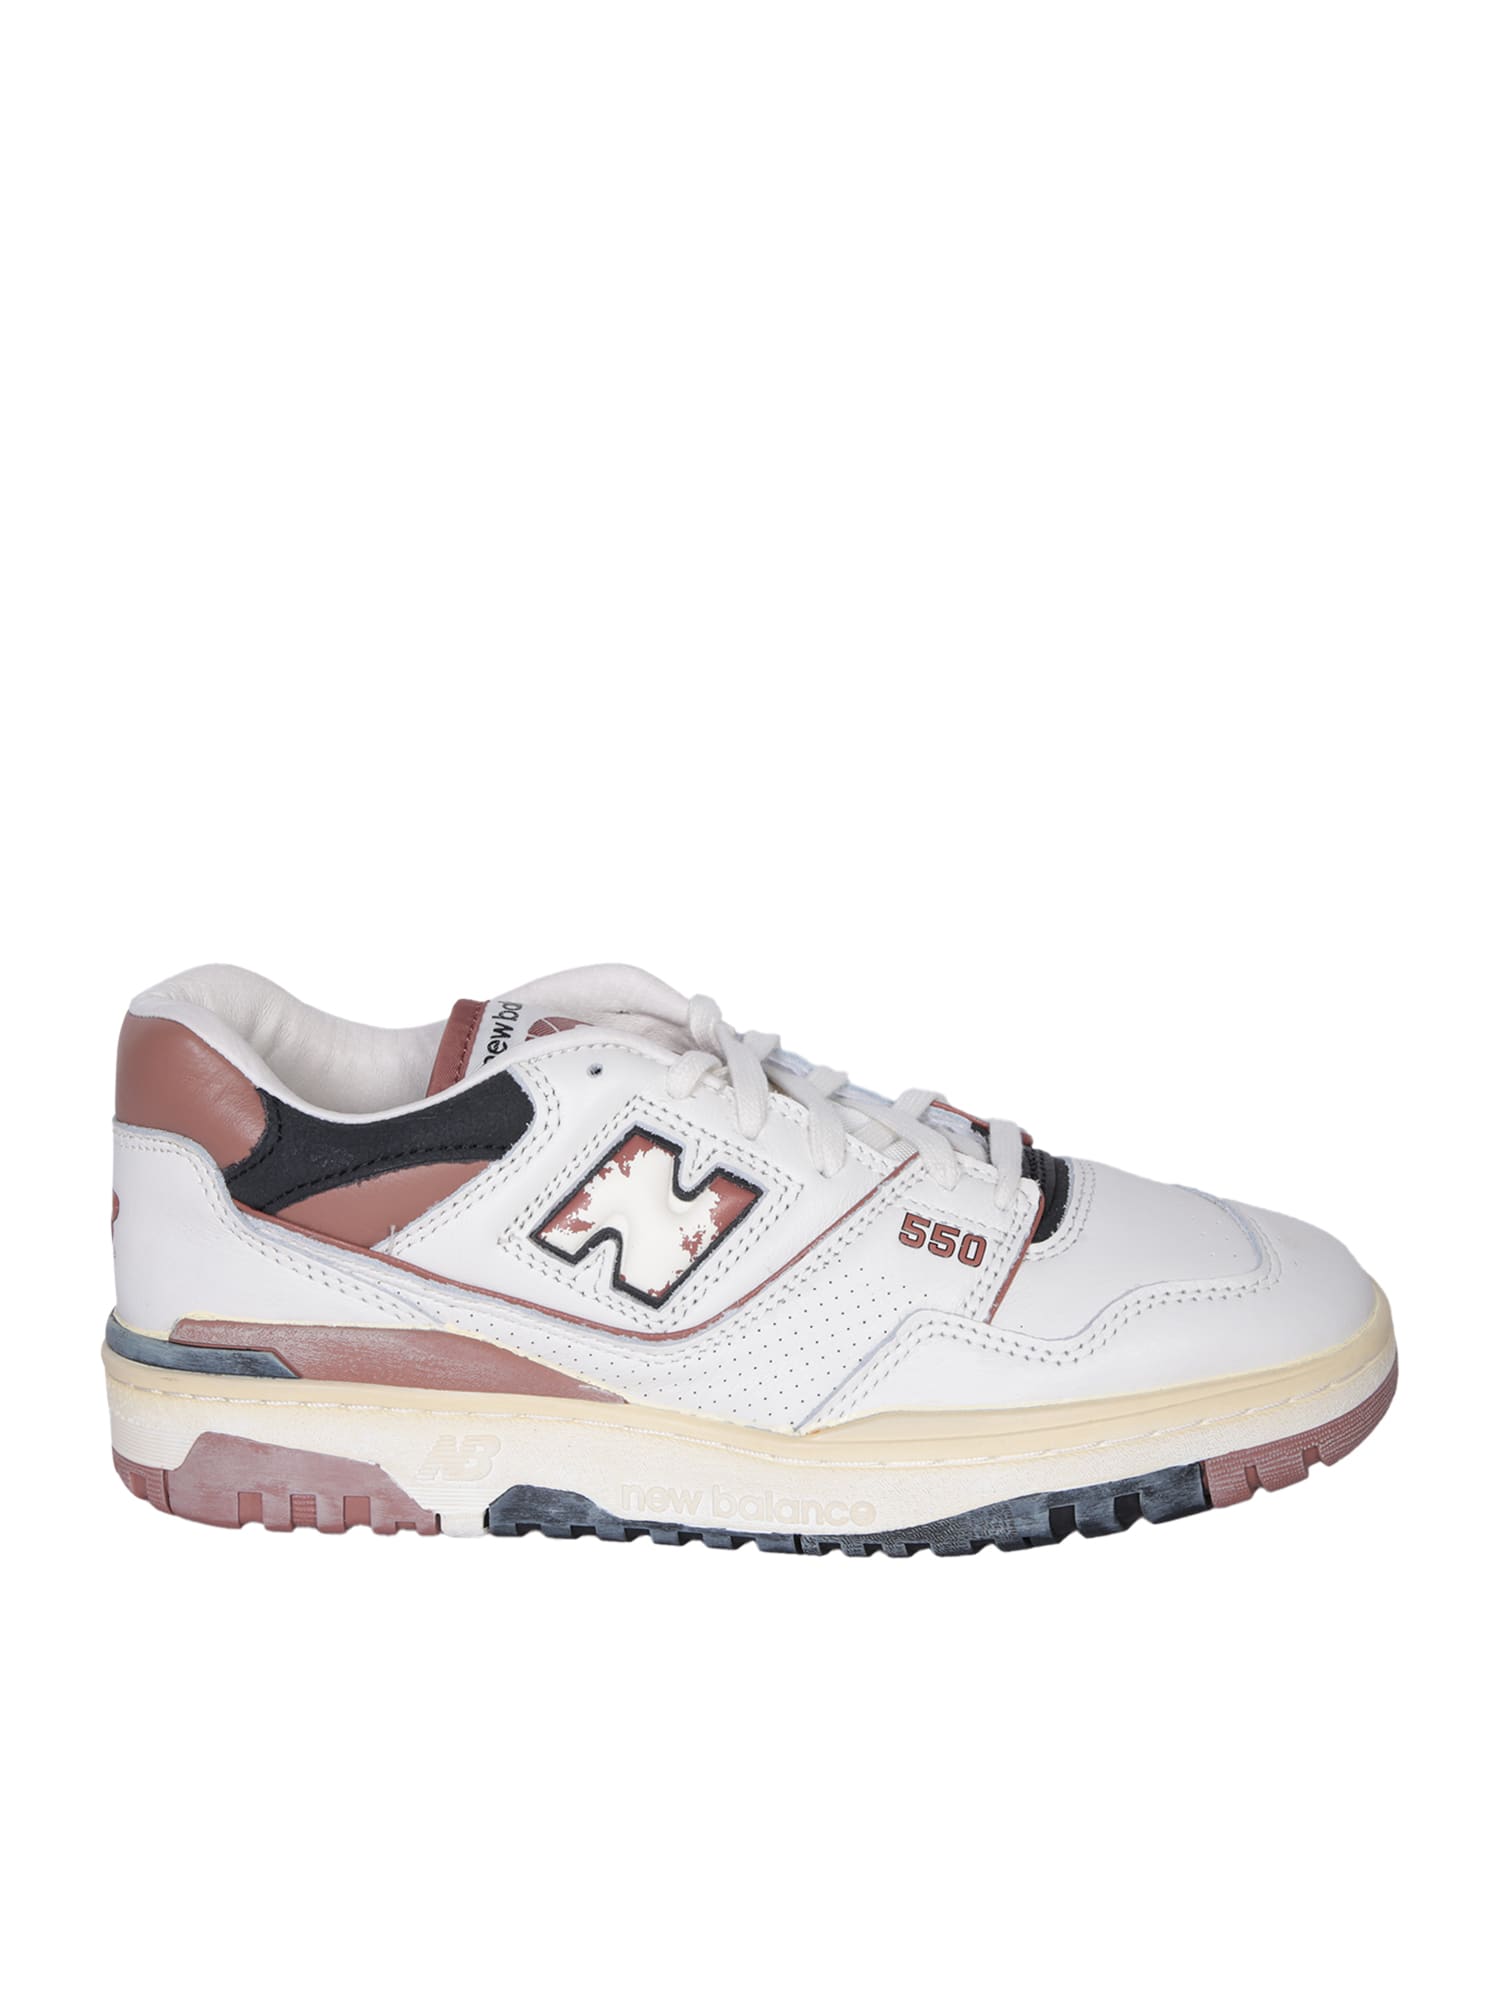 Bb550 White/brown Sneakers